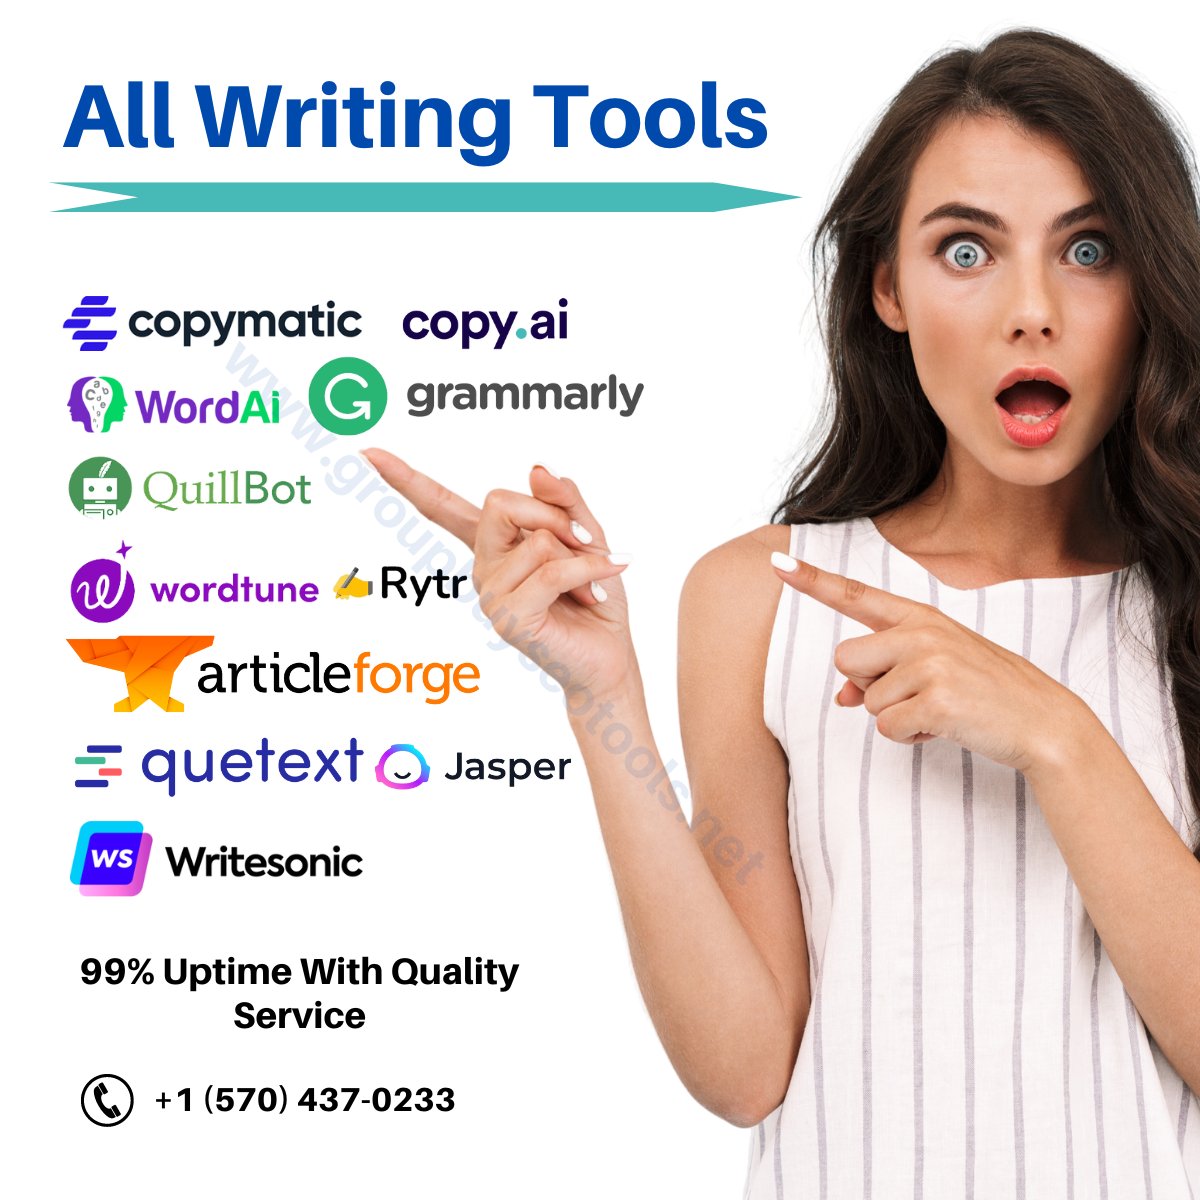 All Writing Tools
99% Uptime With Quality Service
All these Account Available in cheapest price
👉👉WhatsApp me for More details +1 (570) 437-0233

#writing #quality #writingtools #writingservices